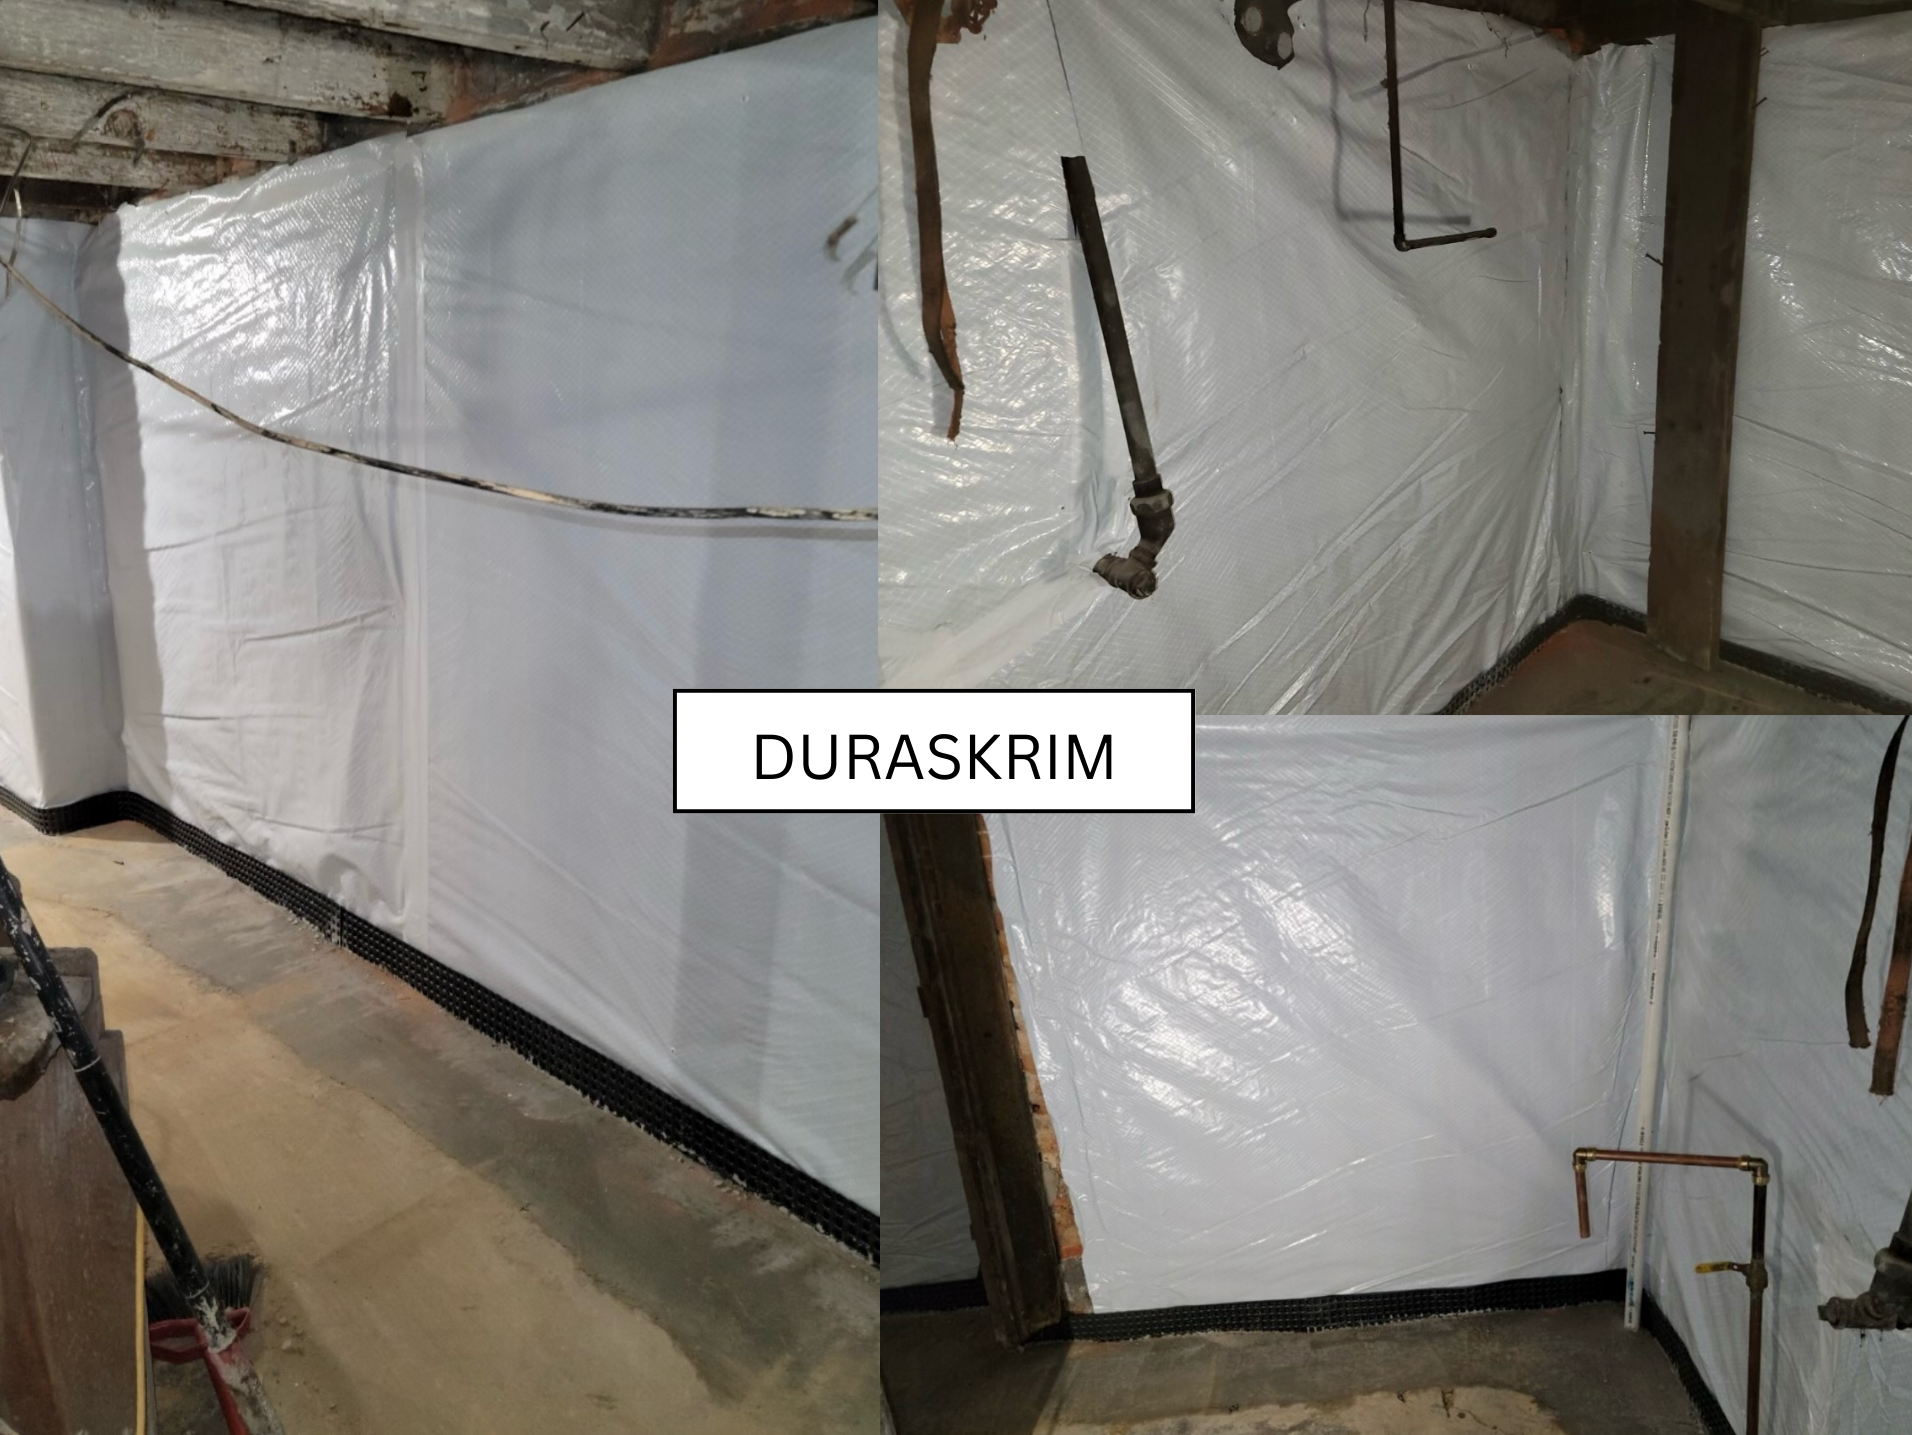 Before and After with Duraskrim on the walls.